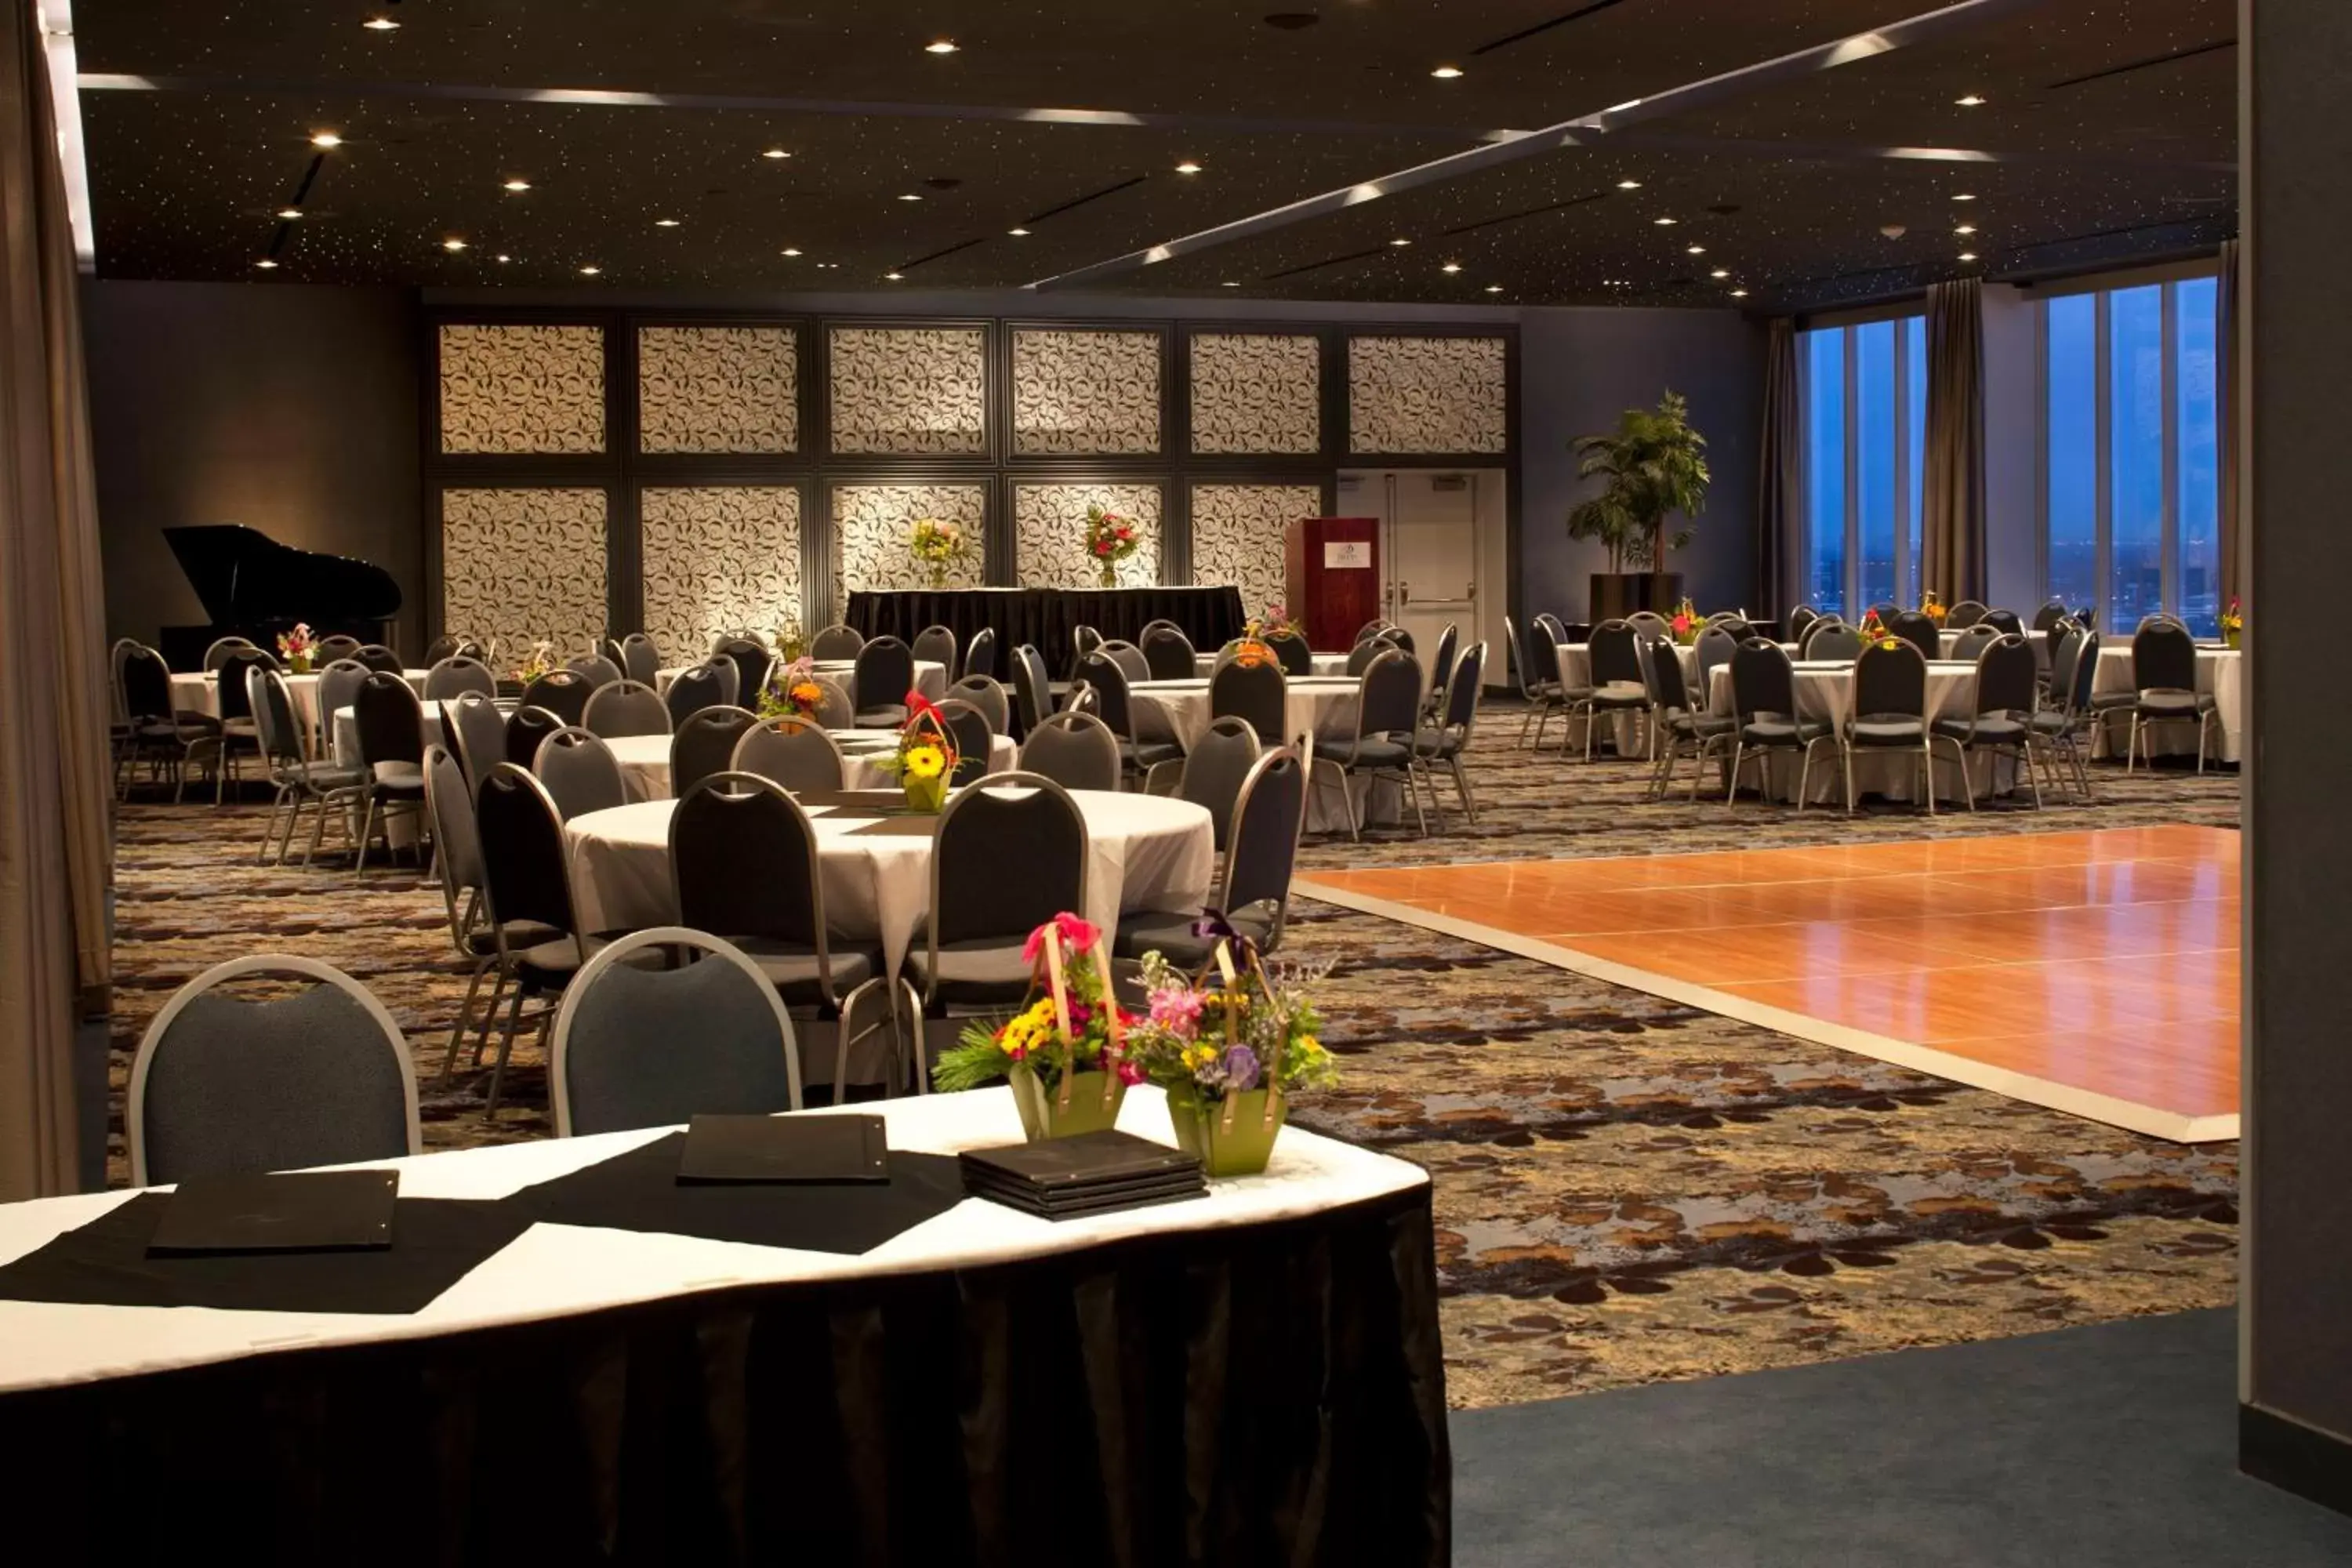 Meeting/conference room, Banquet Facilities in Delta Hotels by Marriott Edmonton South Conference Centre